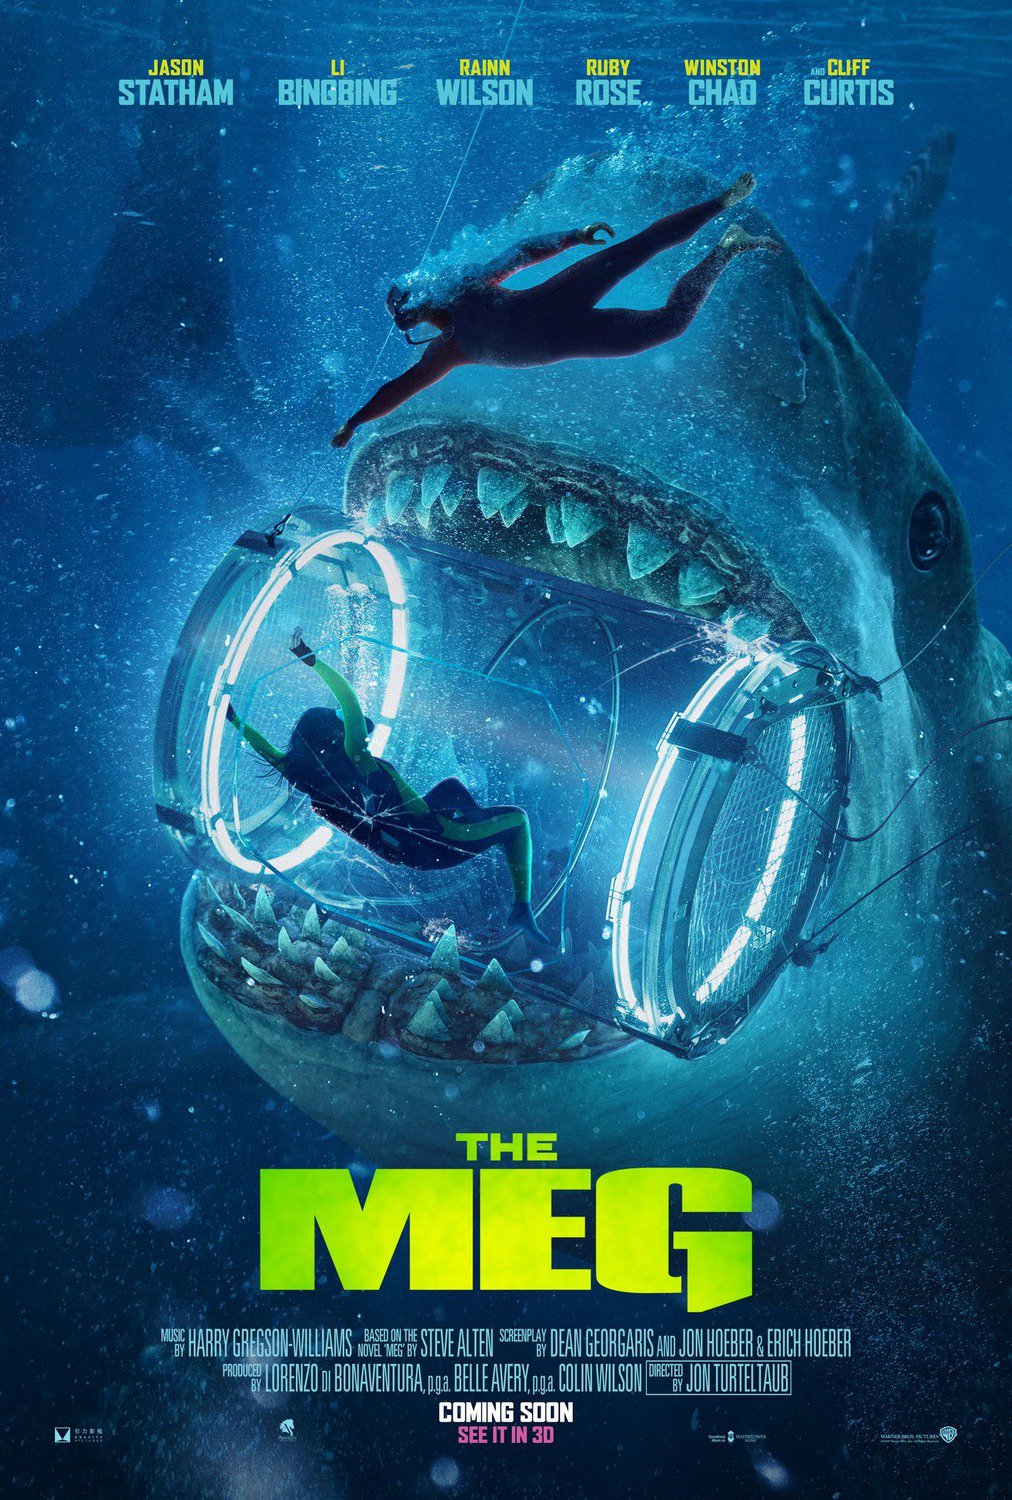 Three new The Meg movie posters hit the web!